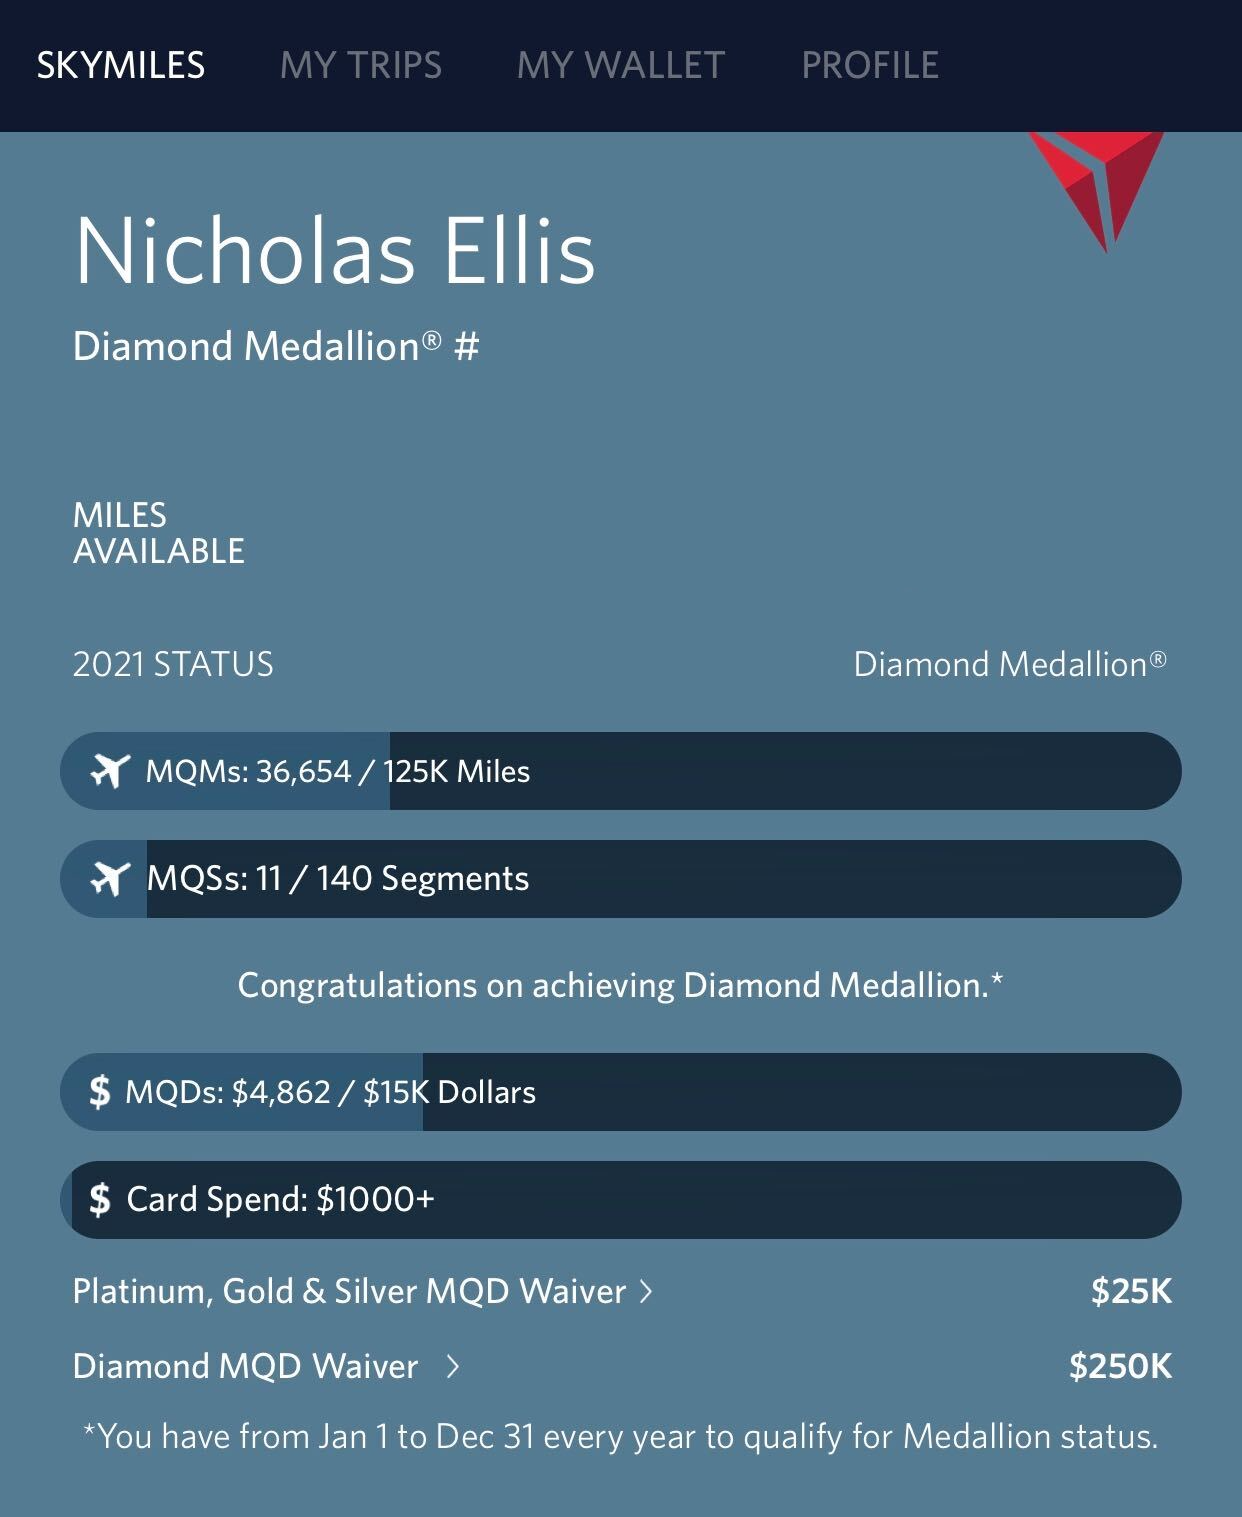 Delta rolls out extended Medallion status well ahead of schedule